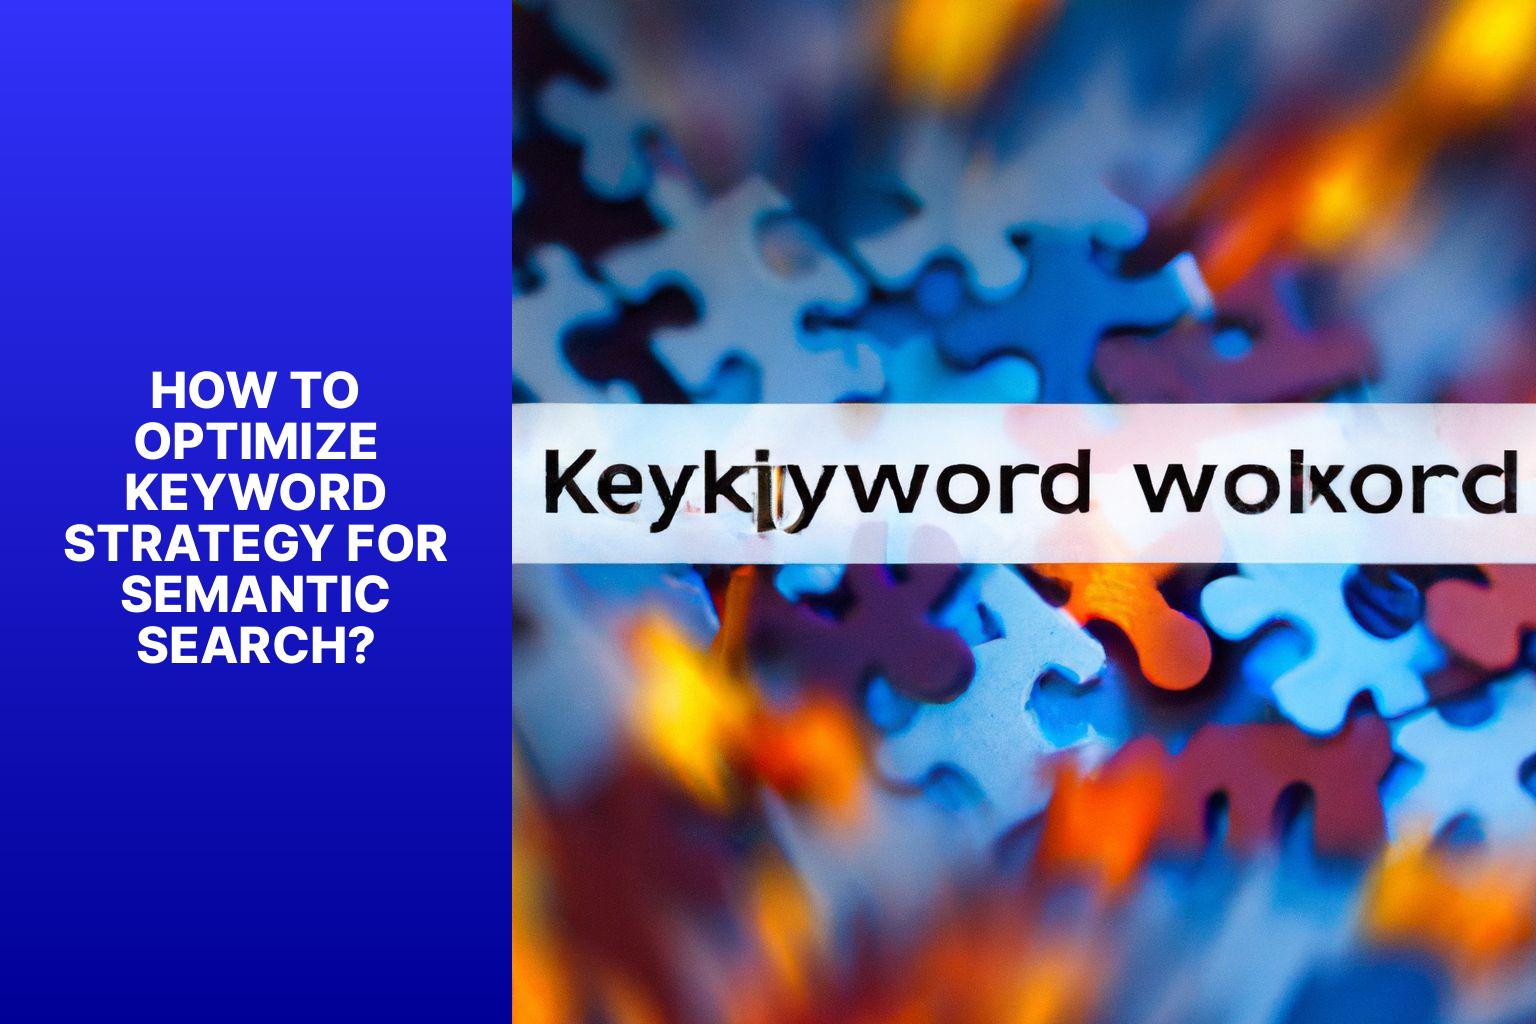 How to Optimize Keyword Strategy for Semantic Search? - Semantic Search and Its Influence on Keyword Strategy 